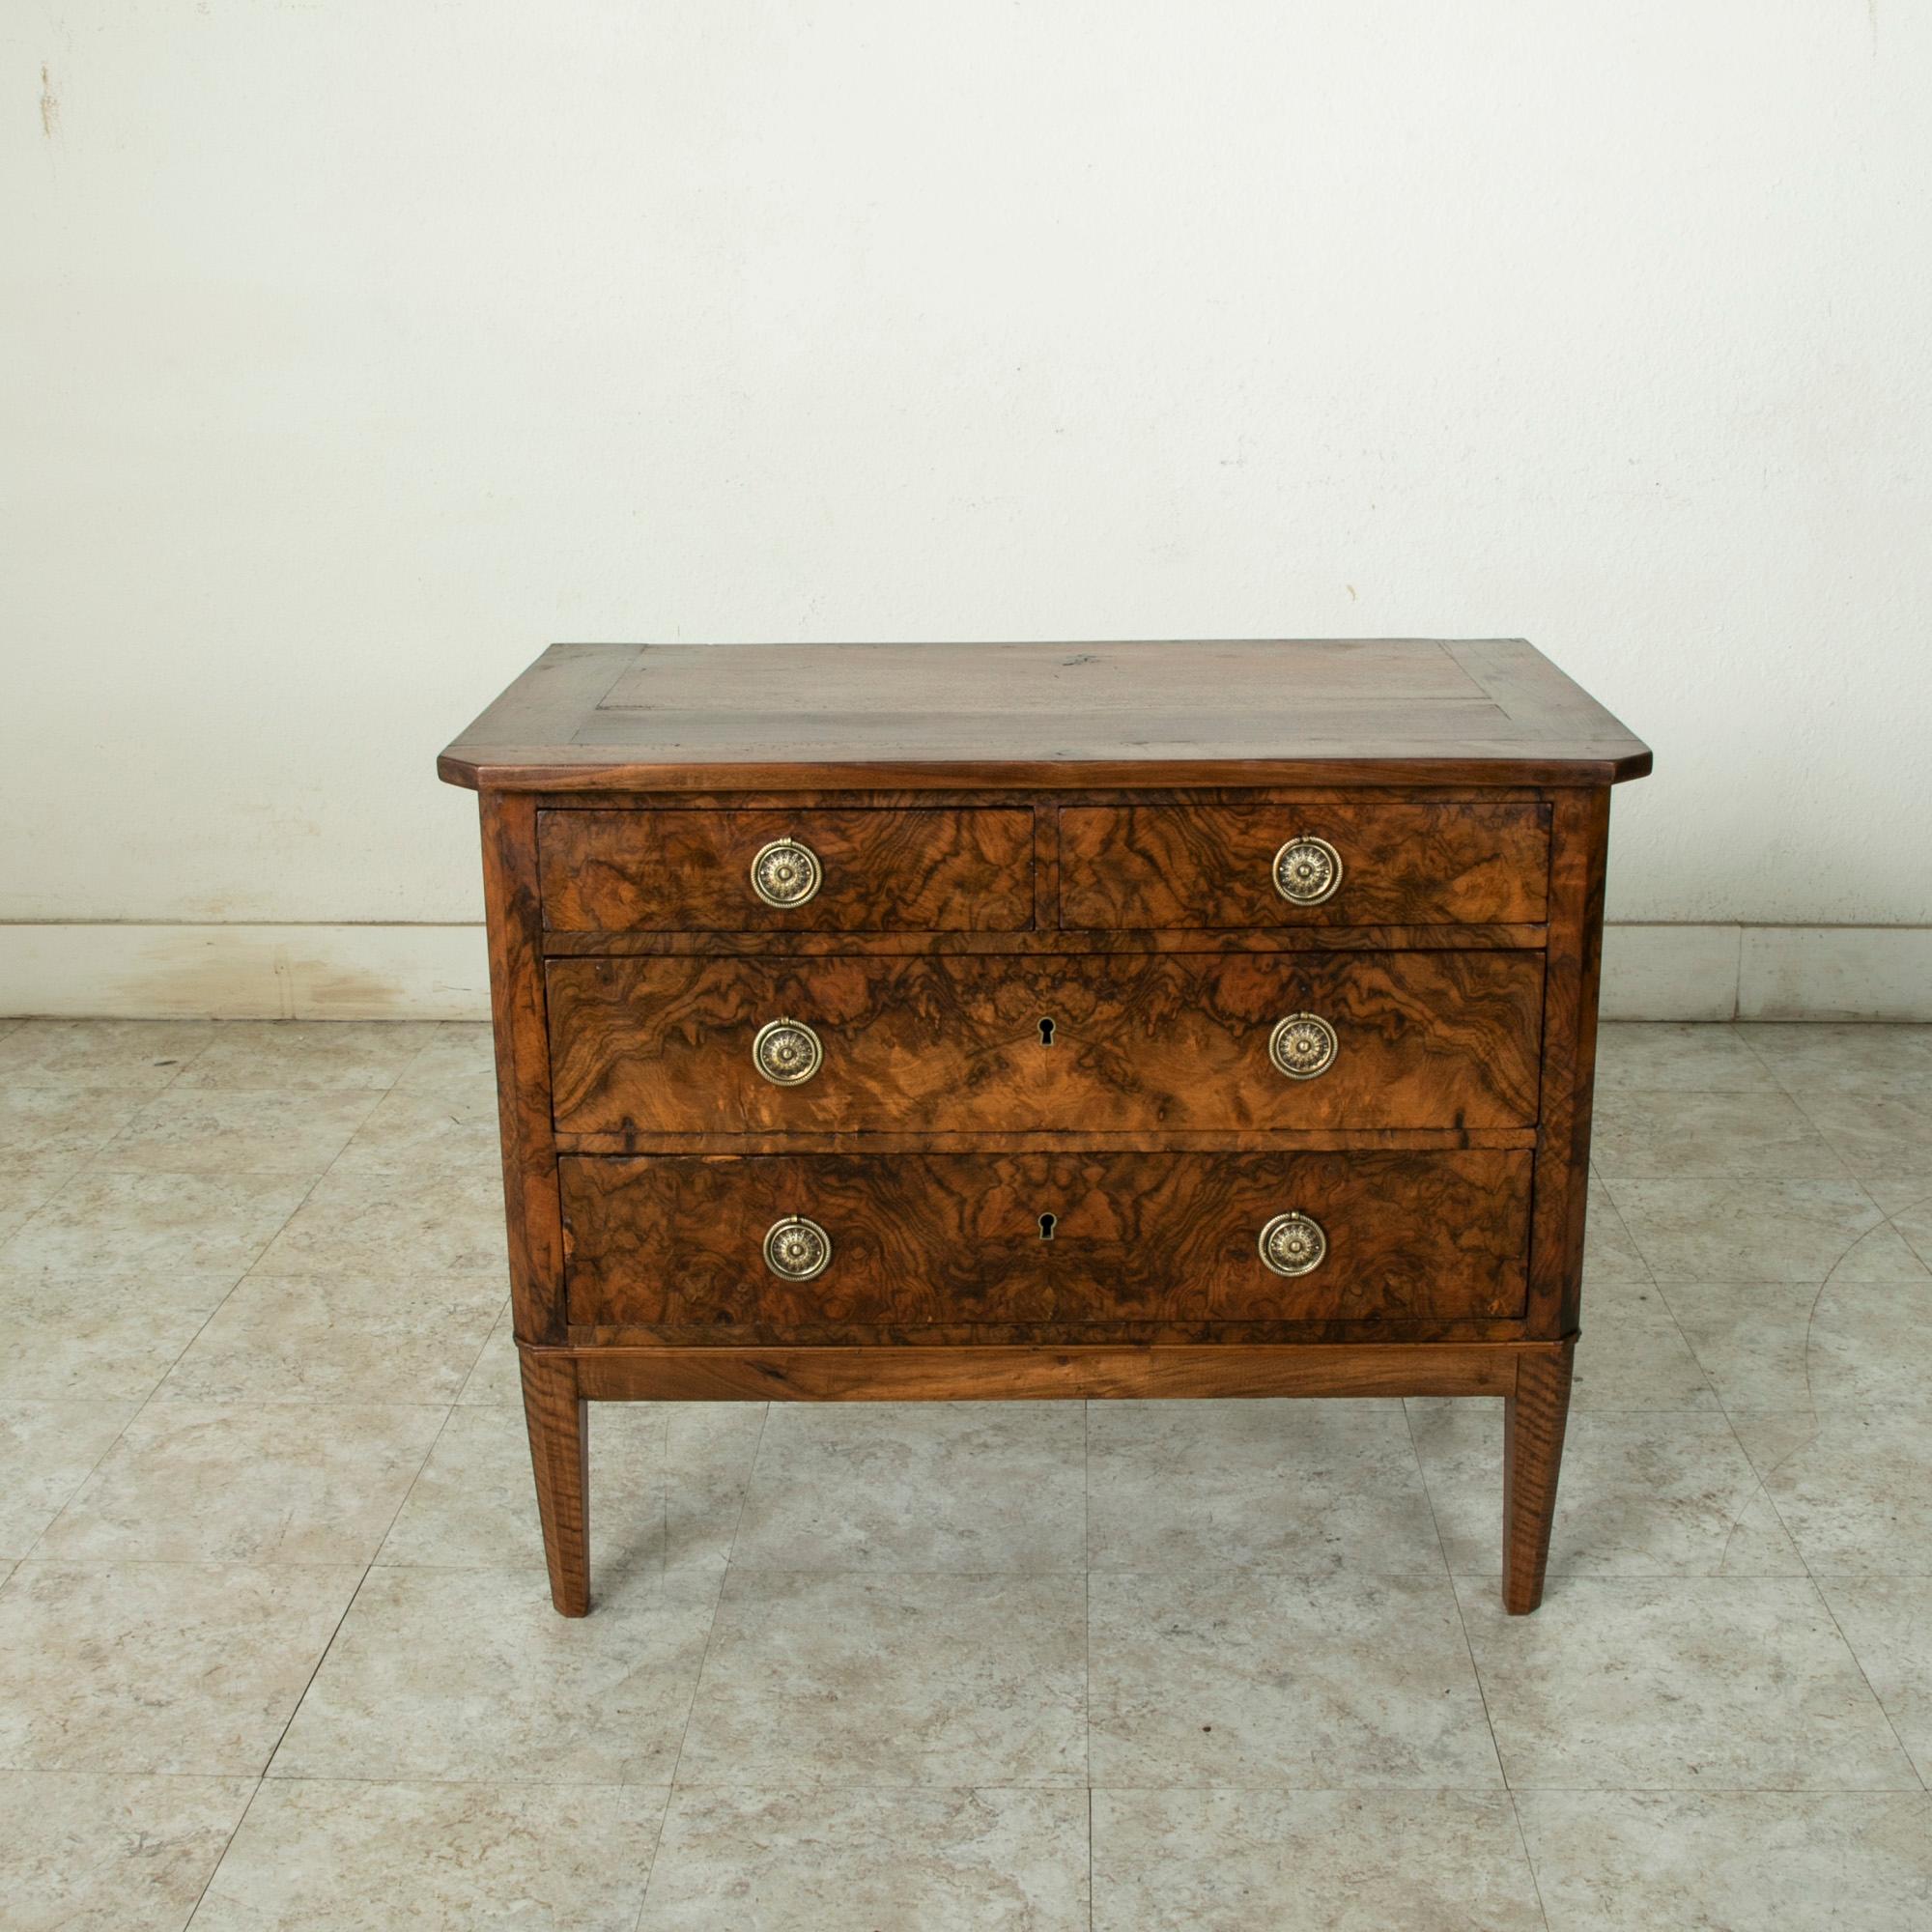 This mid-19th century French Directoire style commode or chest of drawers features a bookmatched burl walnut facade. Its solid walnut top rests above three drawers of dovetail construction. The drawers are fitted with brass drop ring handles, and